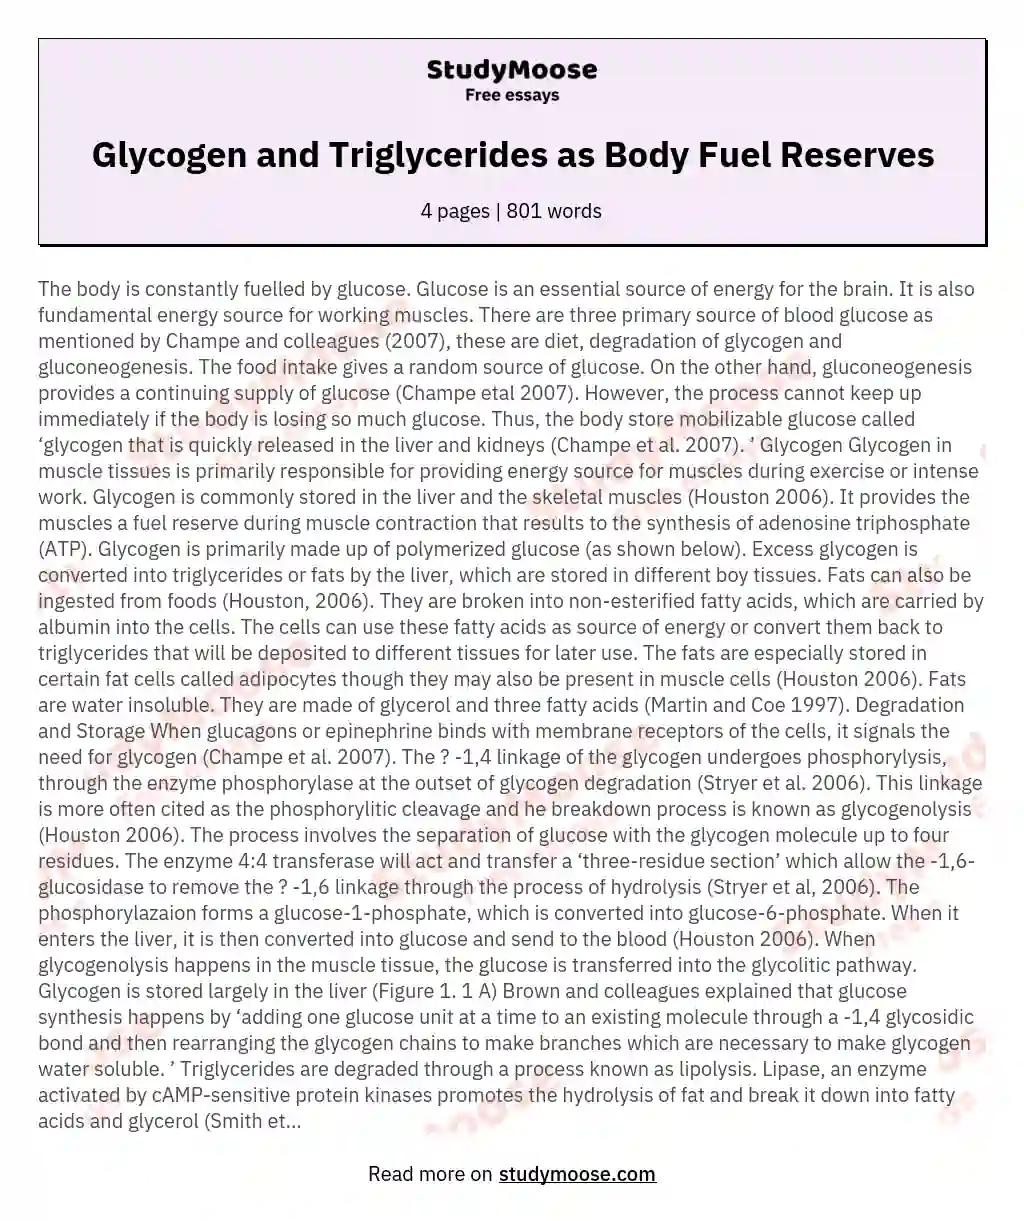 Glycogen and Triglycerides as Body Fuel Reserves essay